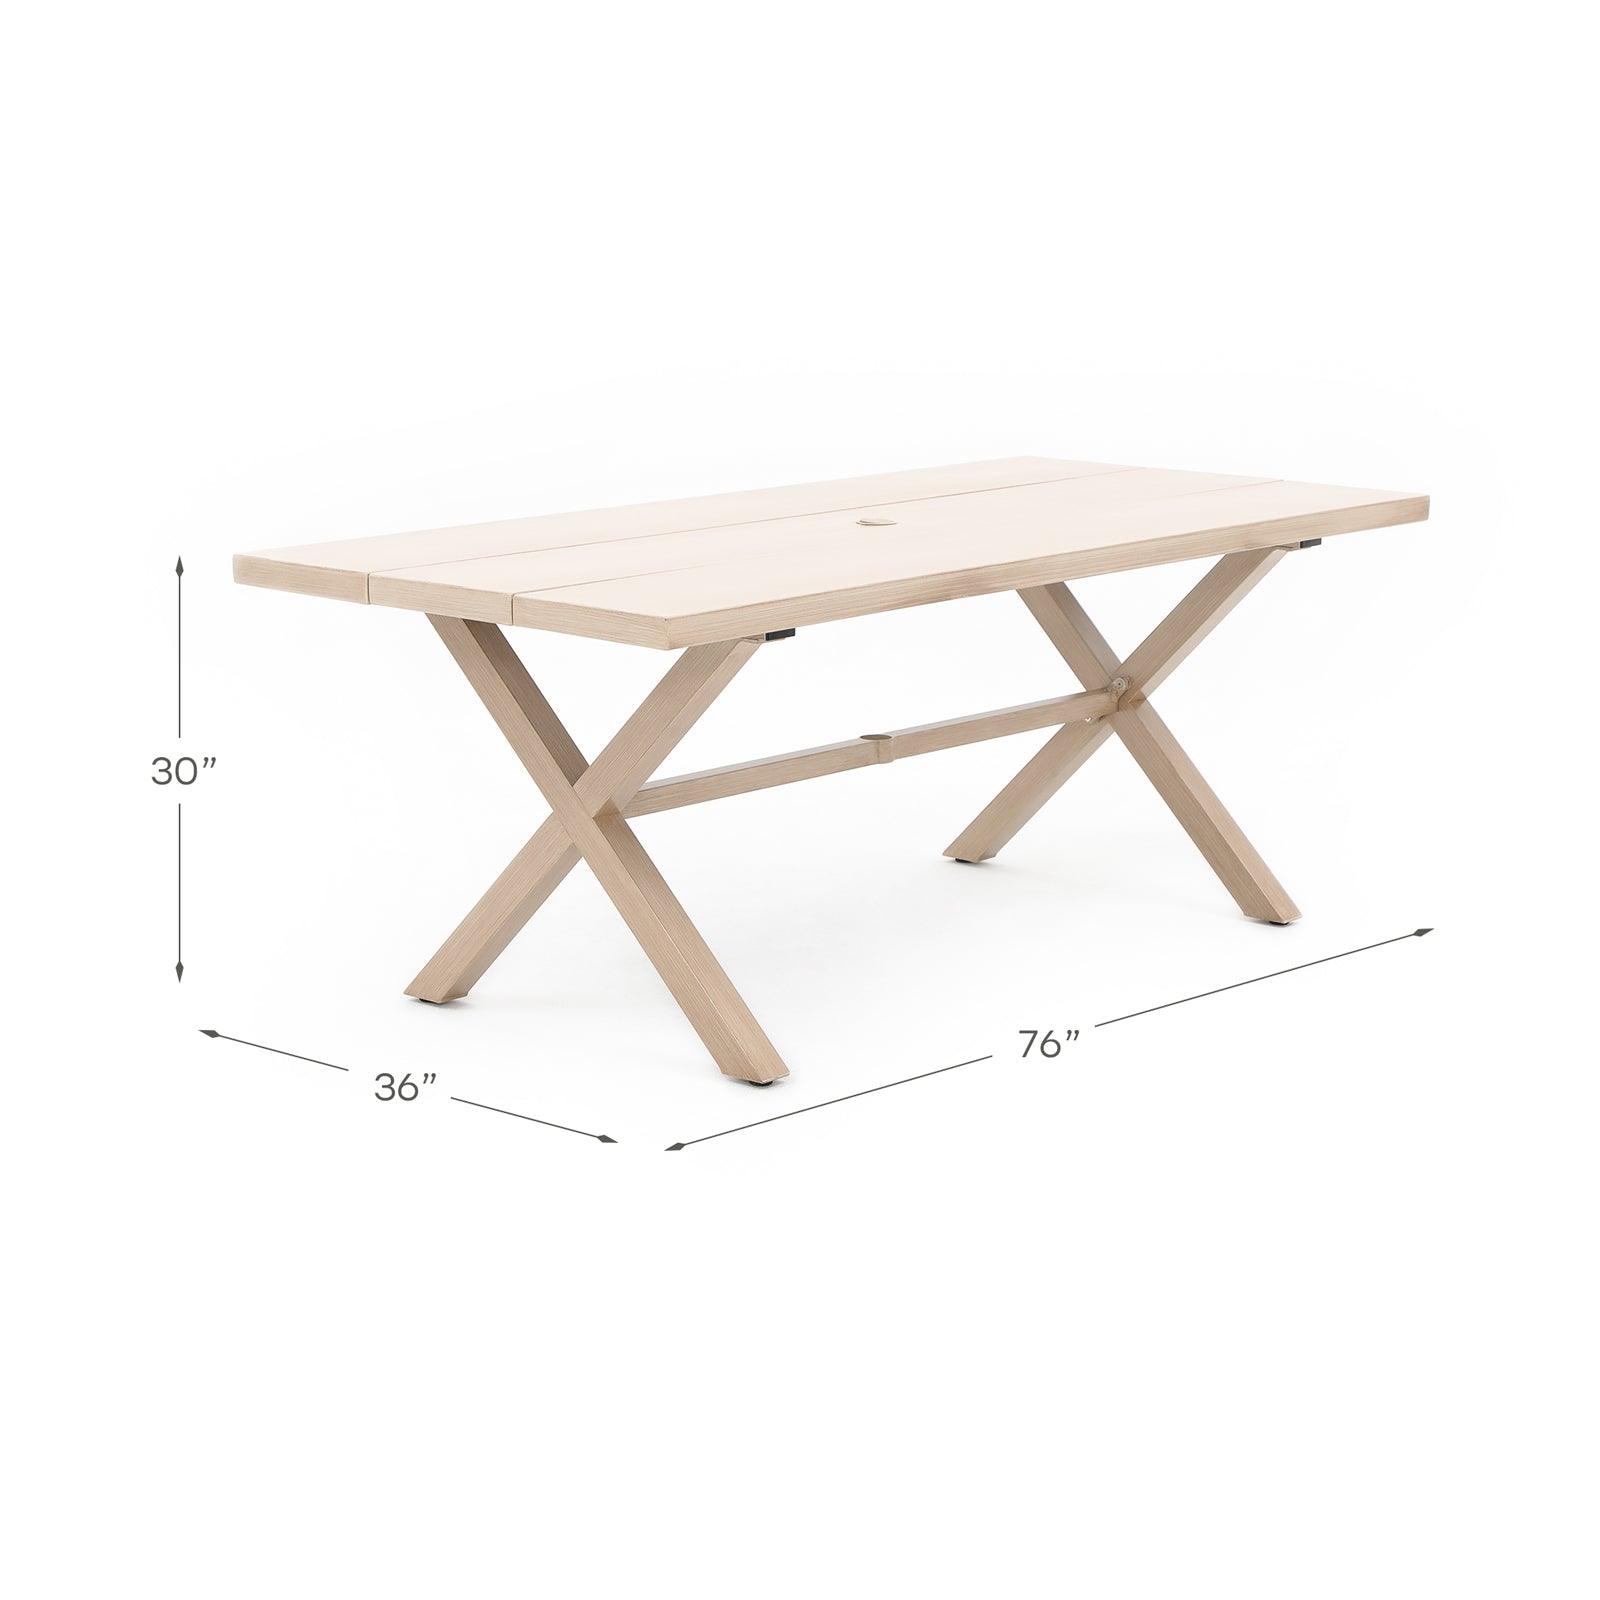 Irati beige outdoor X-shaped dining table with aluminum frame, Dimension - Jardina Furniture